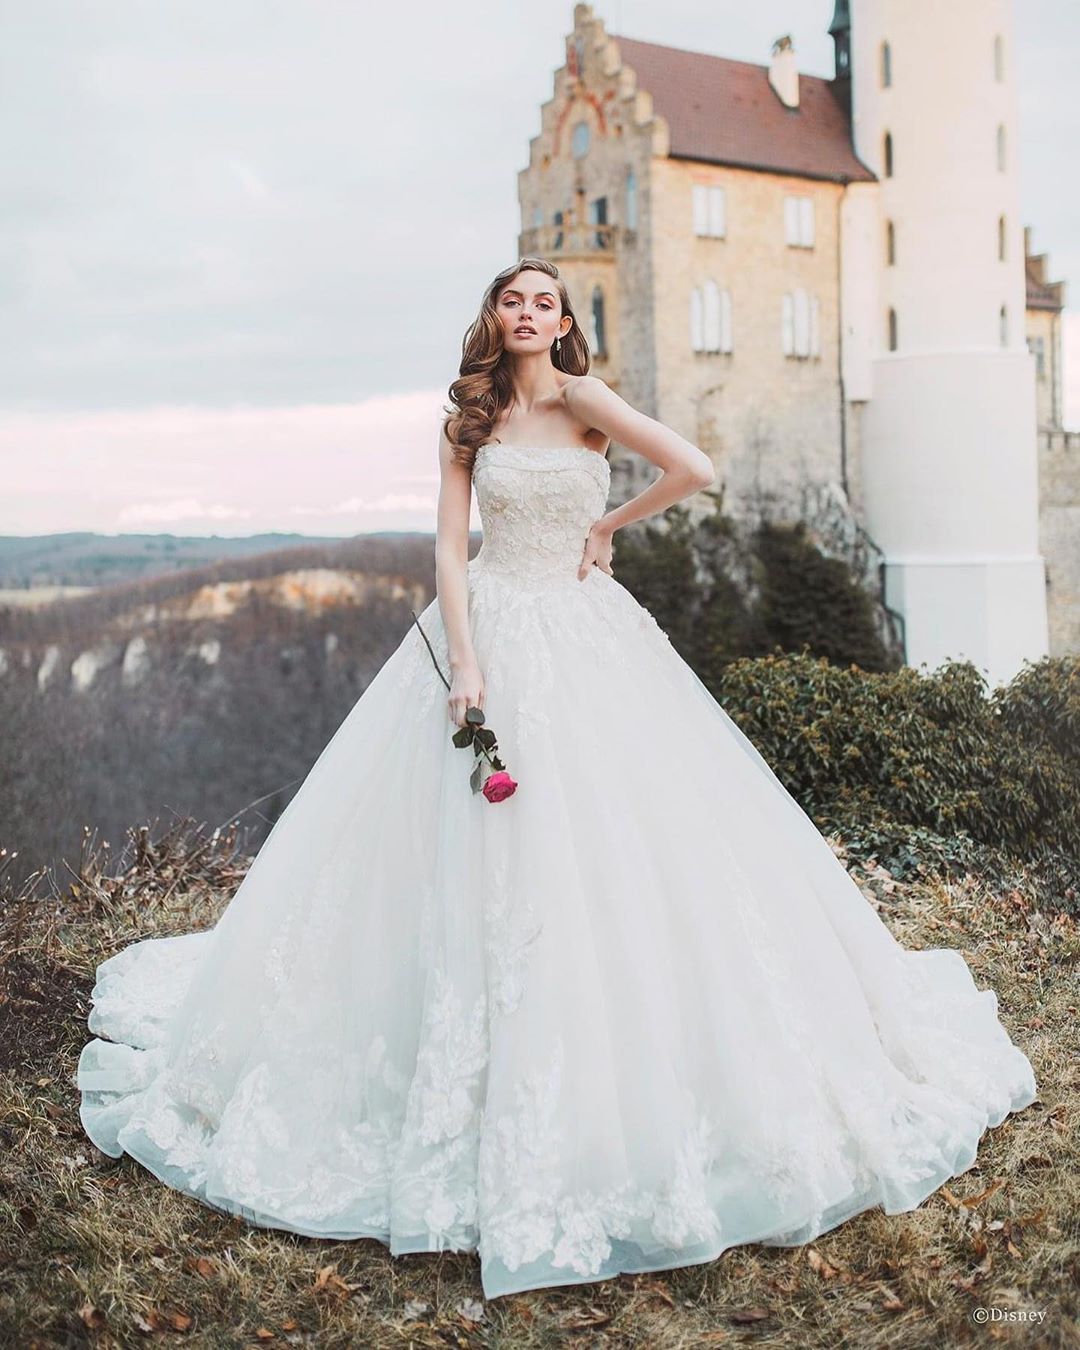 The Aurora Wedding Gowns | The Bridal Collection in Denver, CO